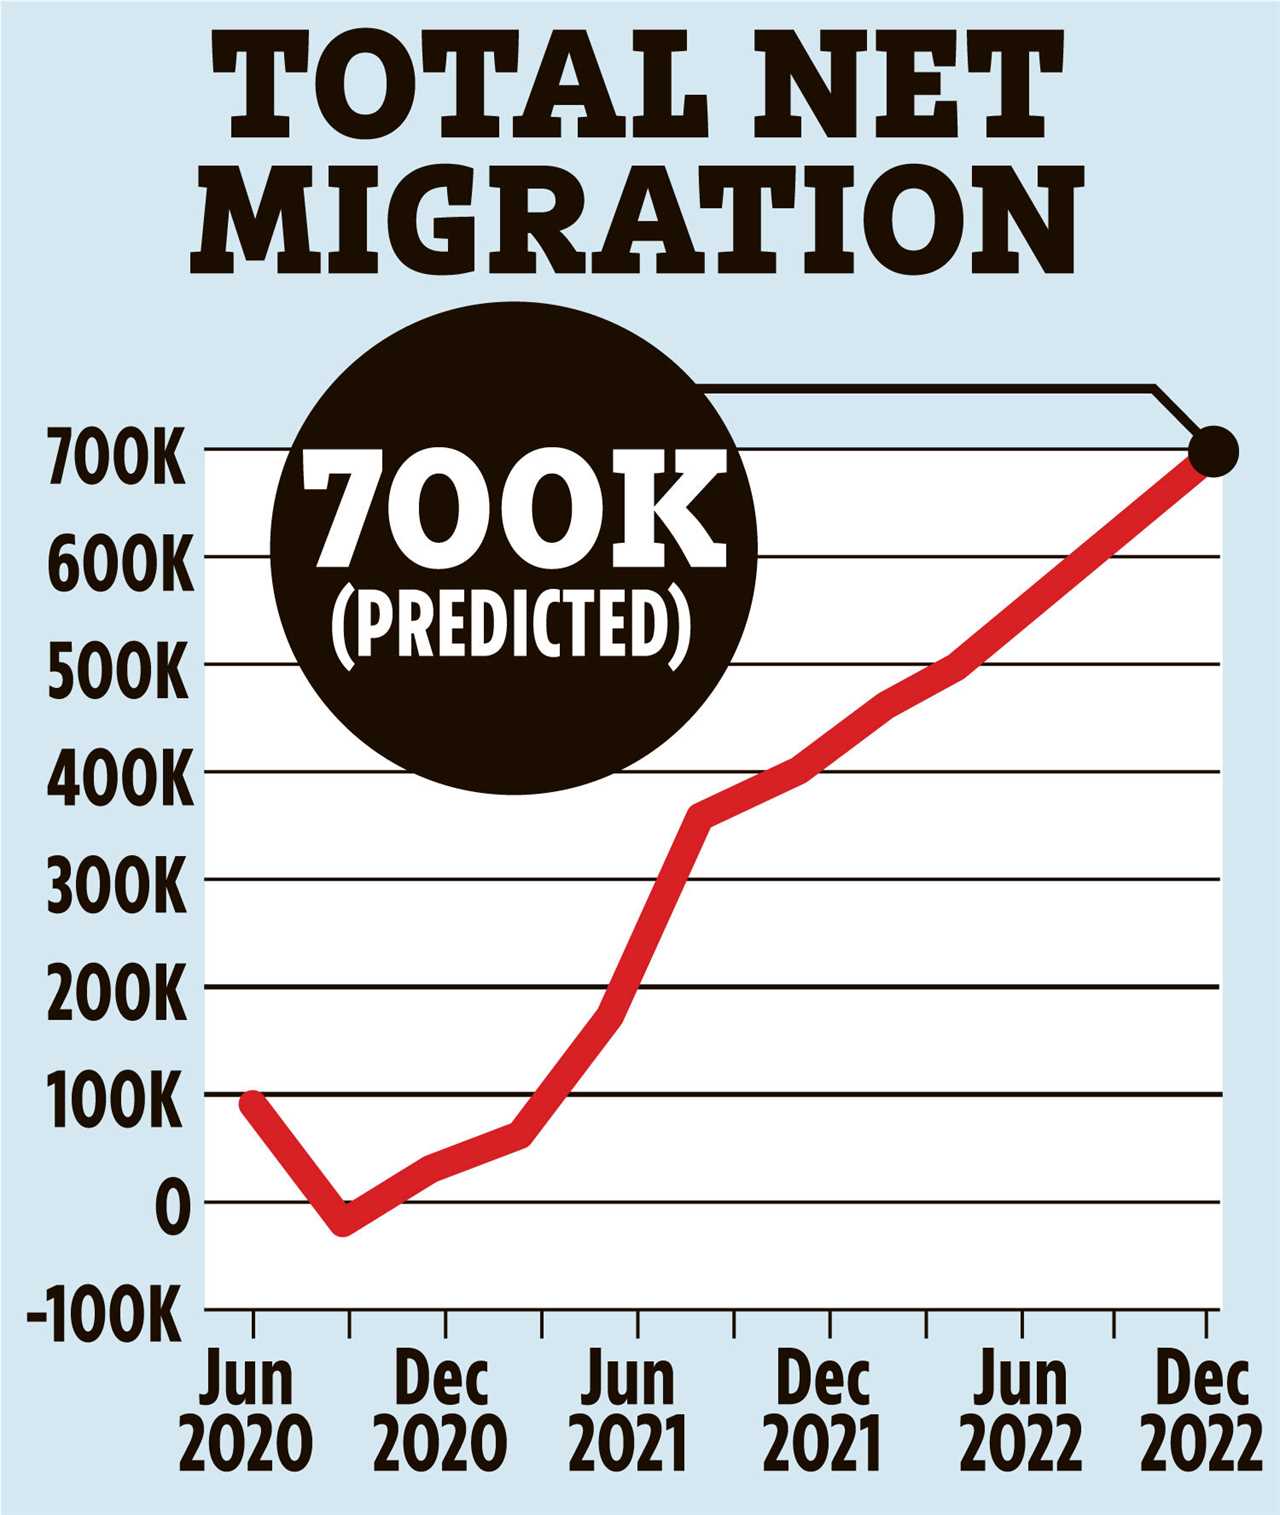 More than 700,000 migrants arrived in the UK last year, official figures set to reveal as Tories fear backlash